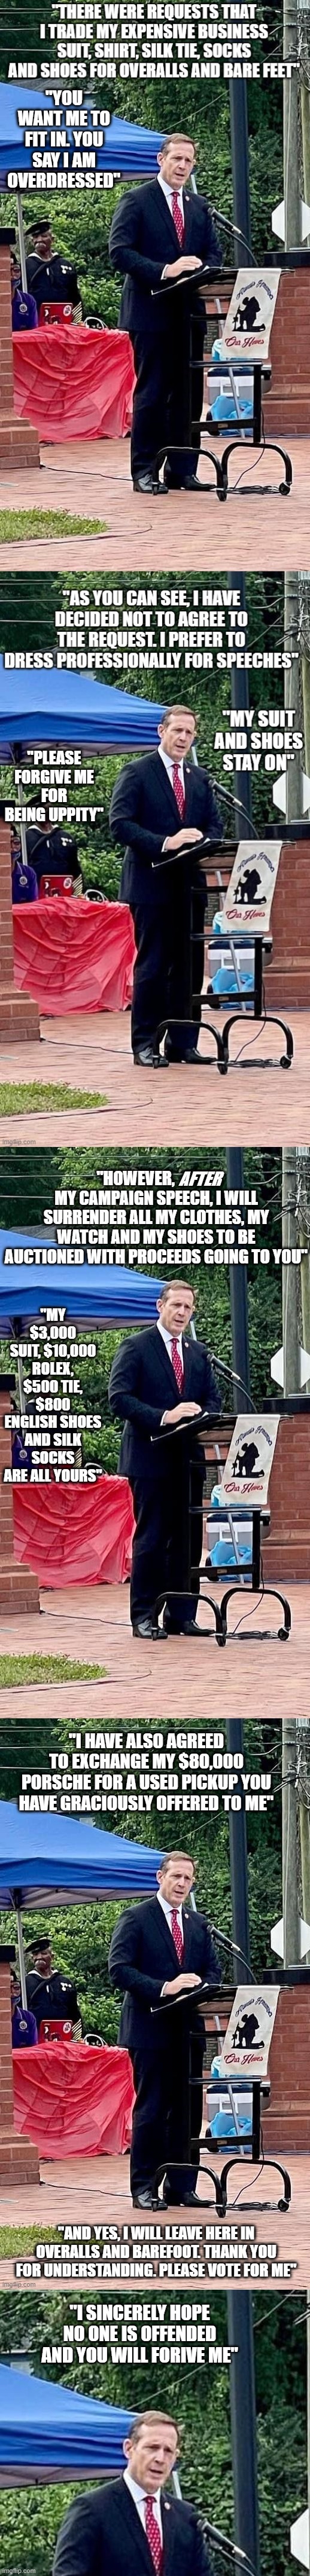 Campaigning, Outreach and Compromise in Hill Country | "YOU WANT ME TO FIT IN. YOU SAY I AM OVERDRESSED"; "I SINCERELY HOPE NO ONE IS OFFENDED AND YOU WILL FORIVE ME" | image tagged in politics,satire | made w/ Imgflip meme maker